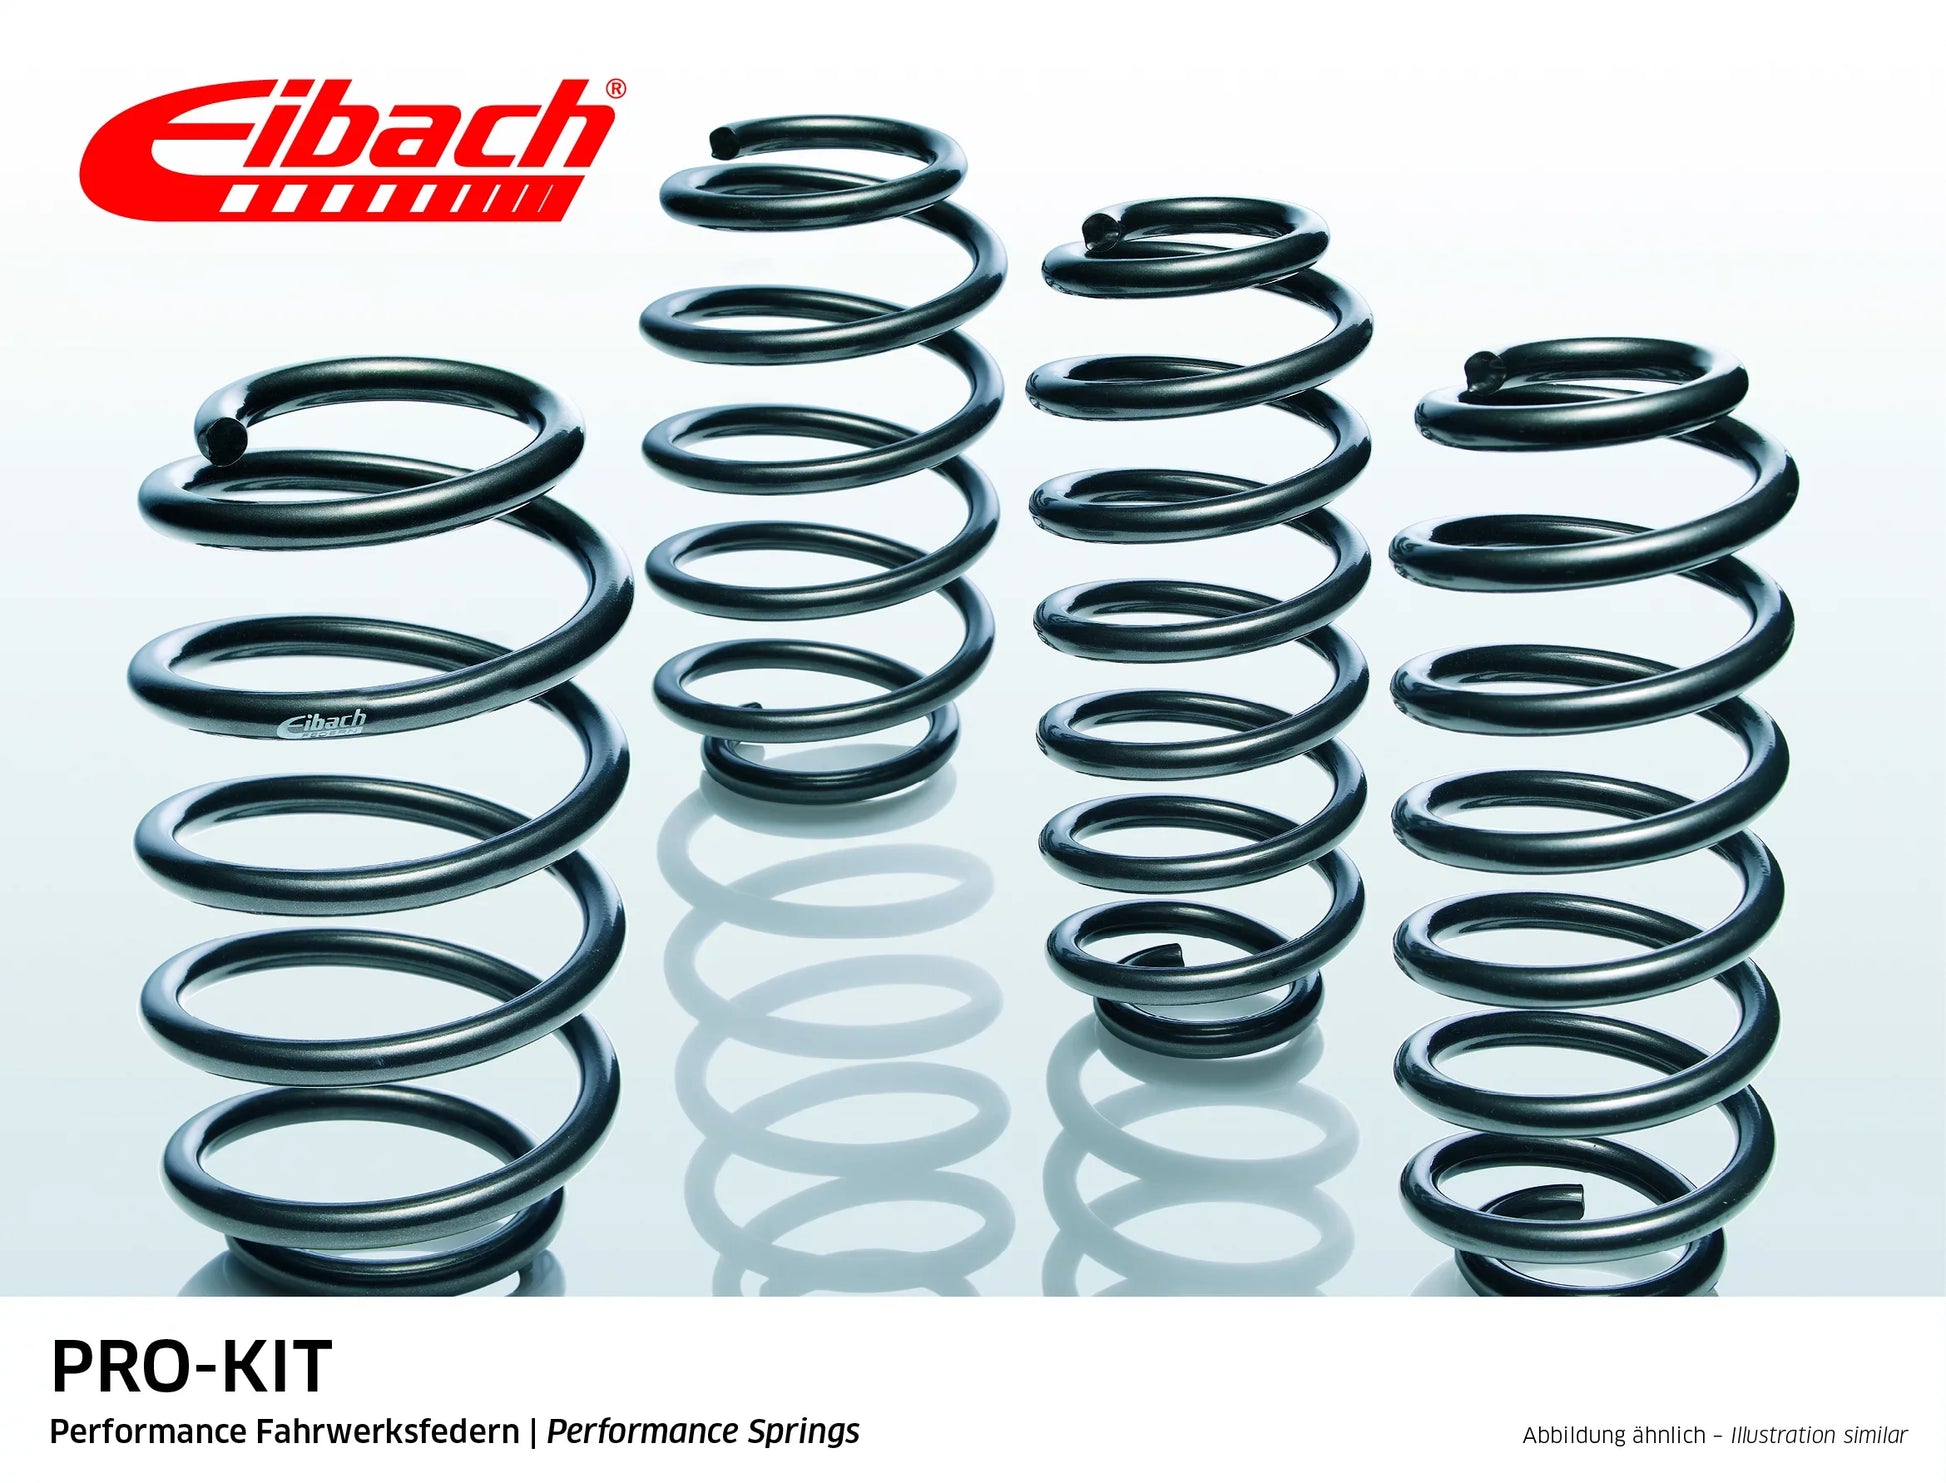 Eibach Pro-Kit Lowering Springs (E7015-140) at £289.94